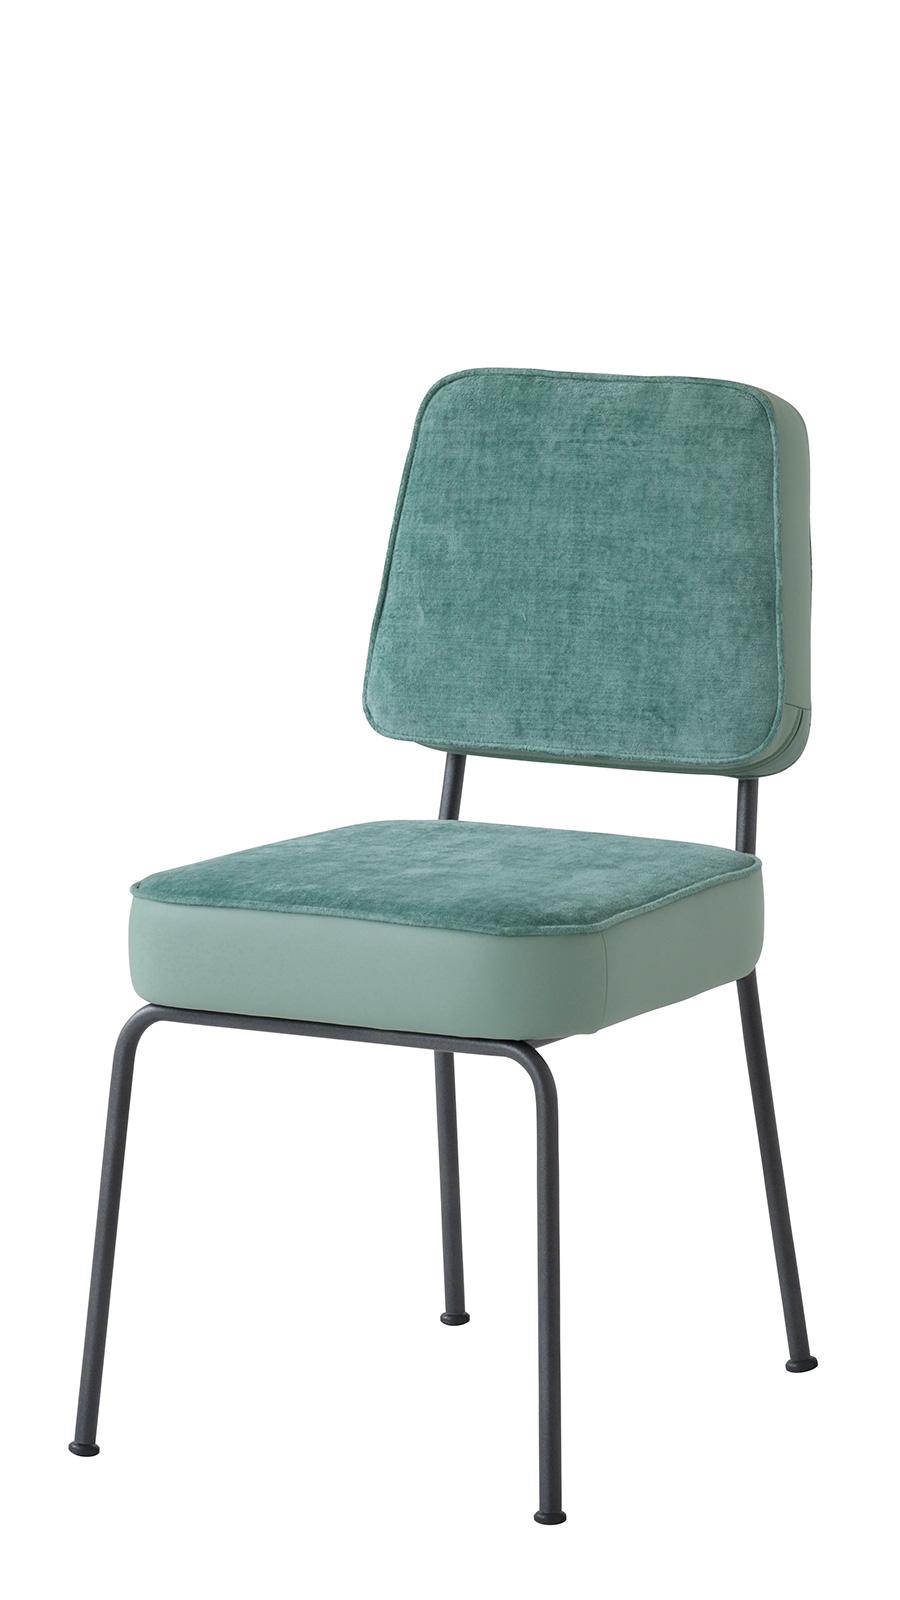 Metal structure. Soft seat and backrest are covered with velvet and soft leather available in several colours. Vintage and classic style padded chair.